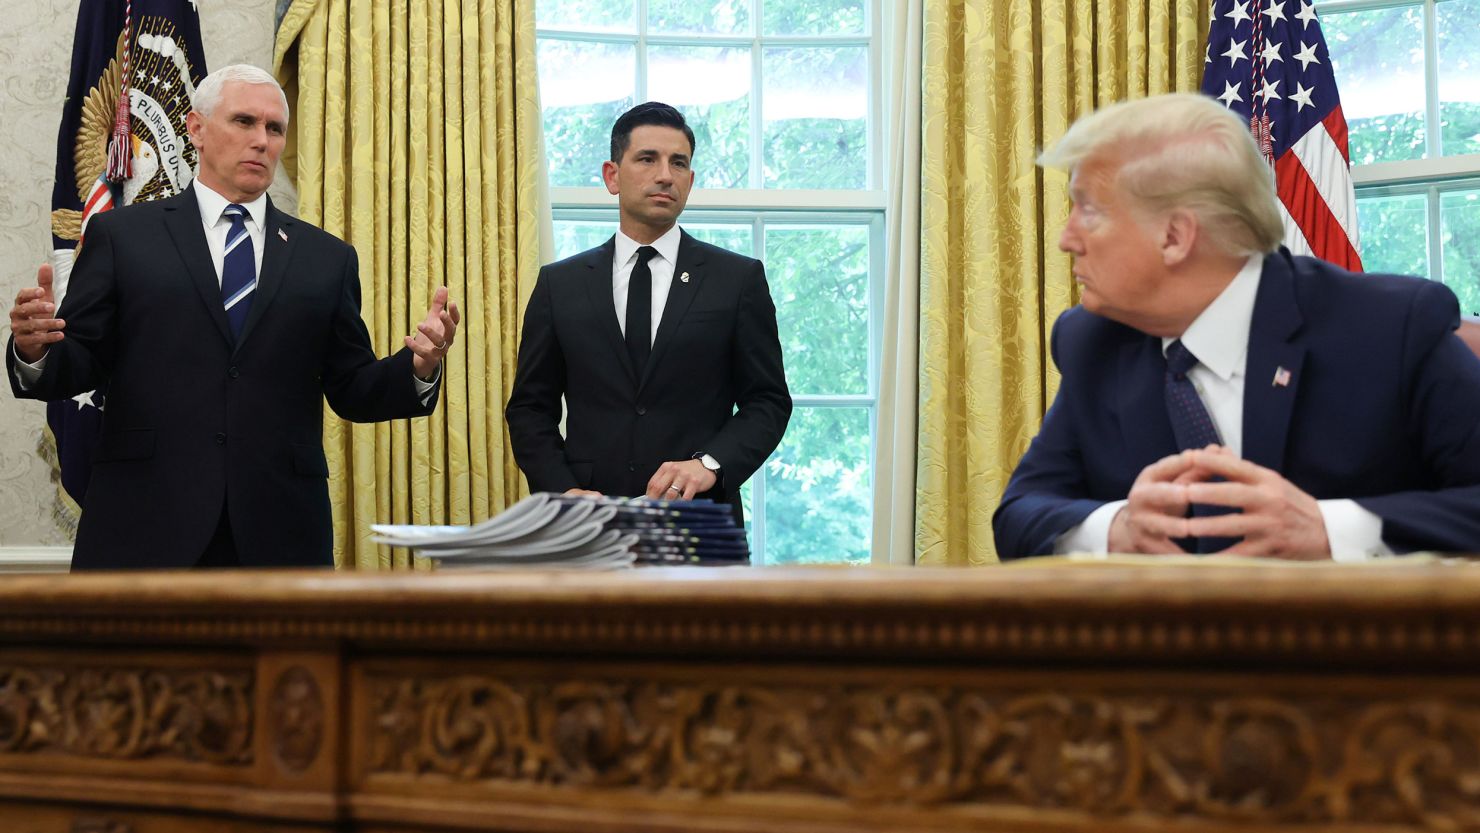 Then-US President Donald Trump listens to Vice President Mike Pence and acting Secretary of Homeland Security Chad Wolf, May 28, 2020.